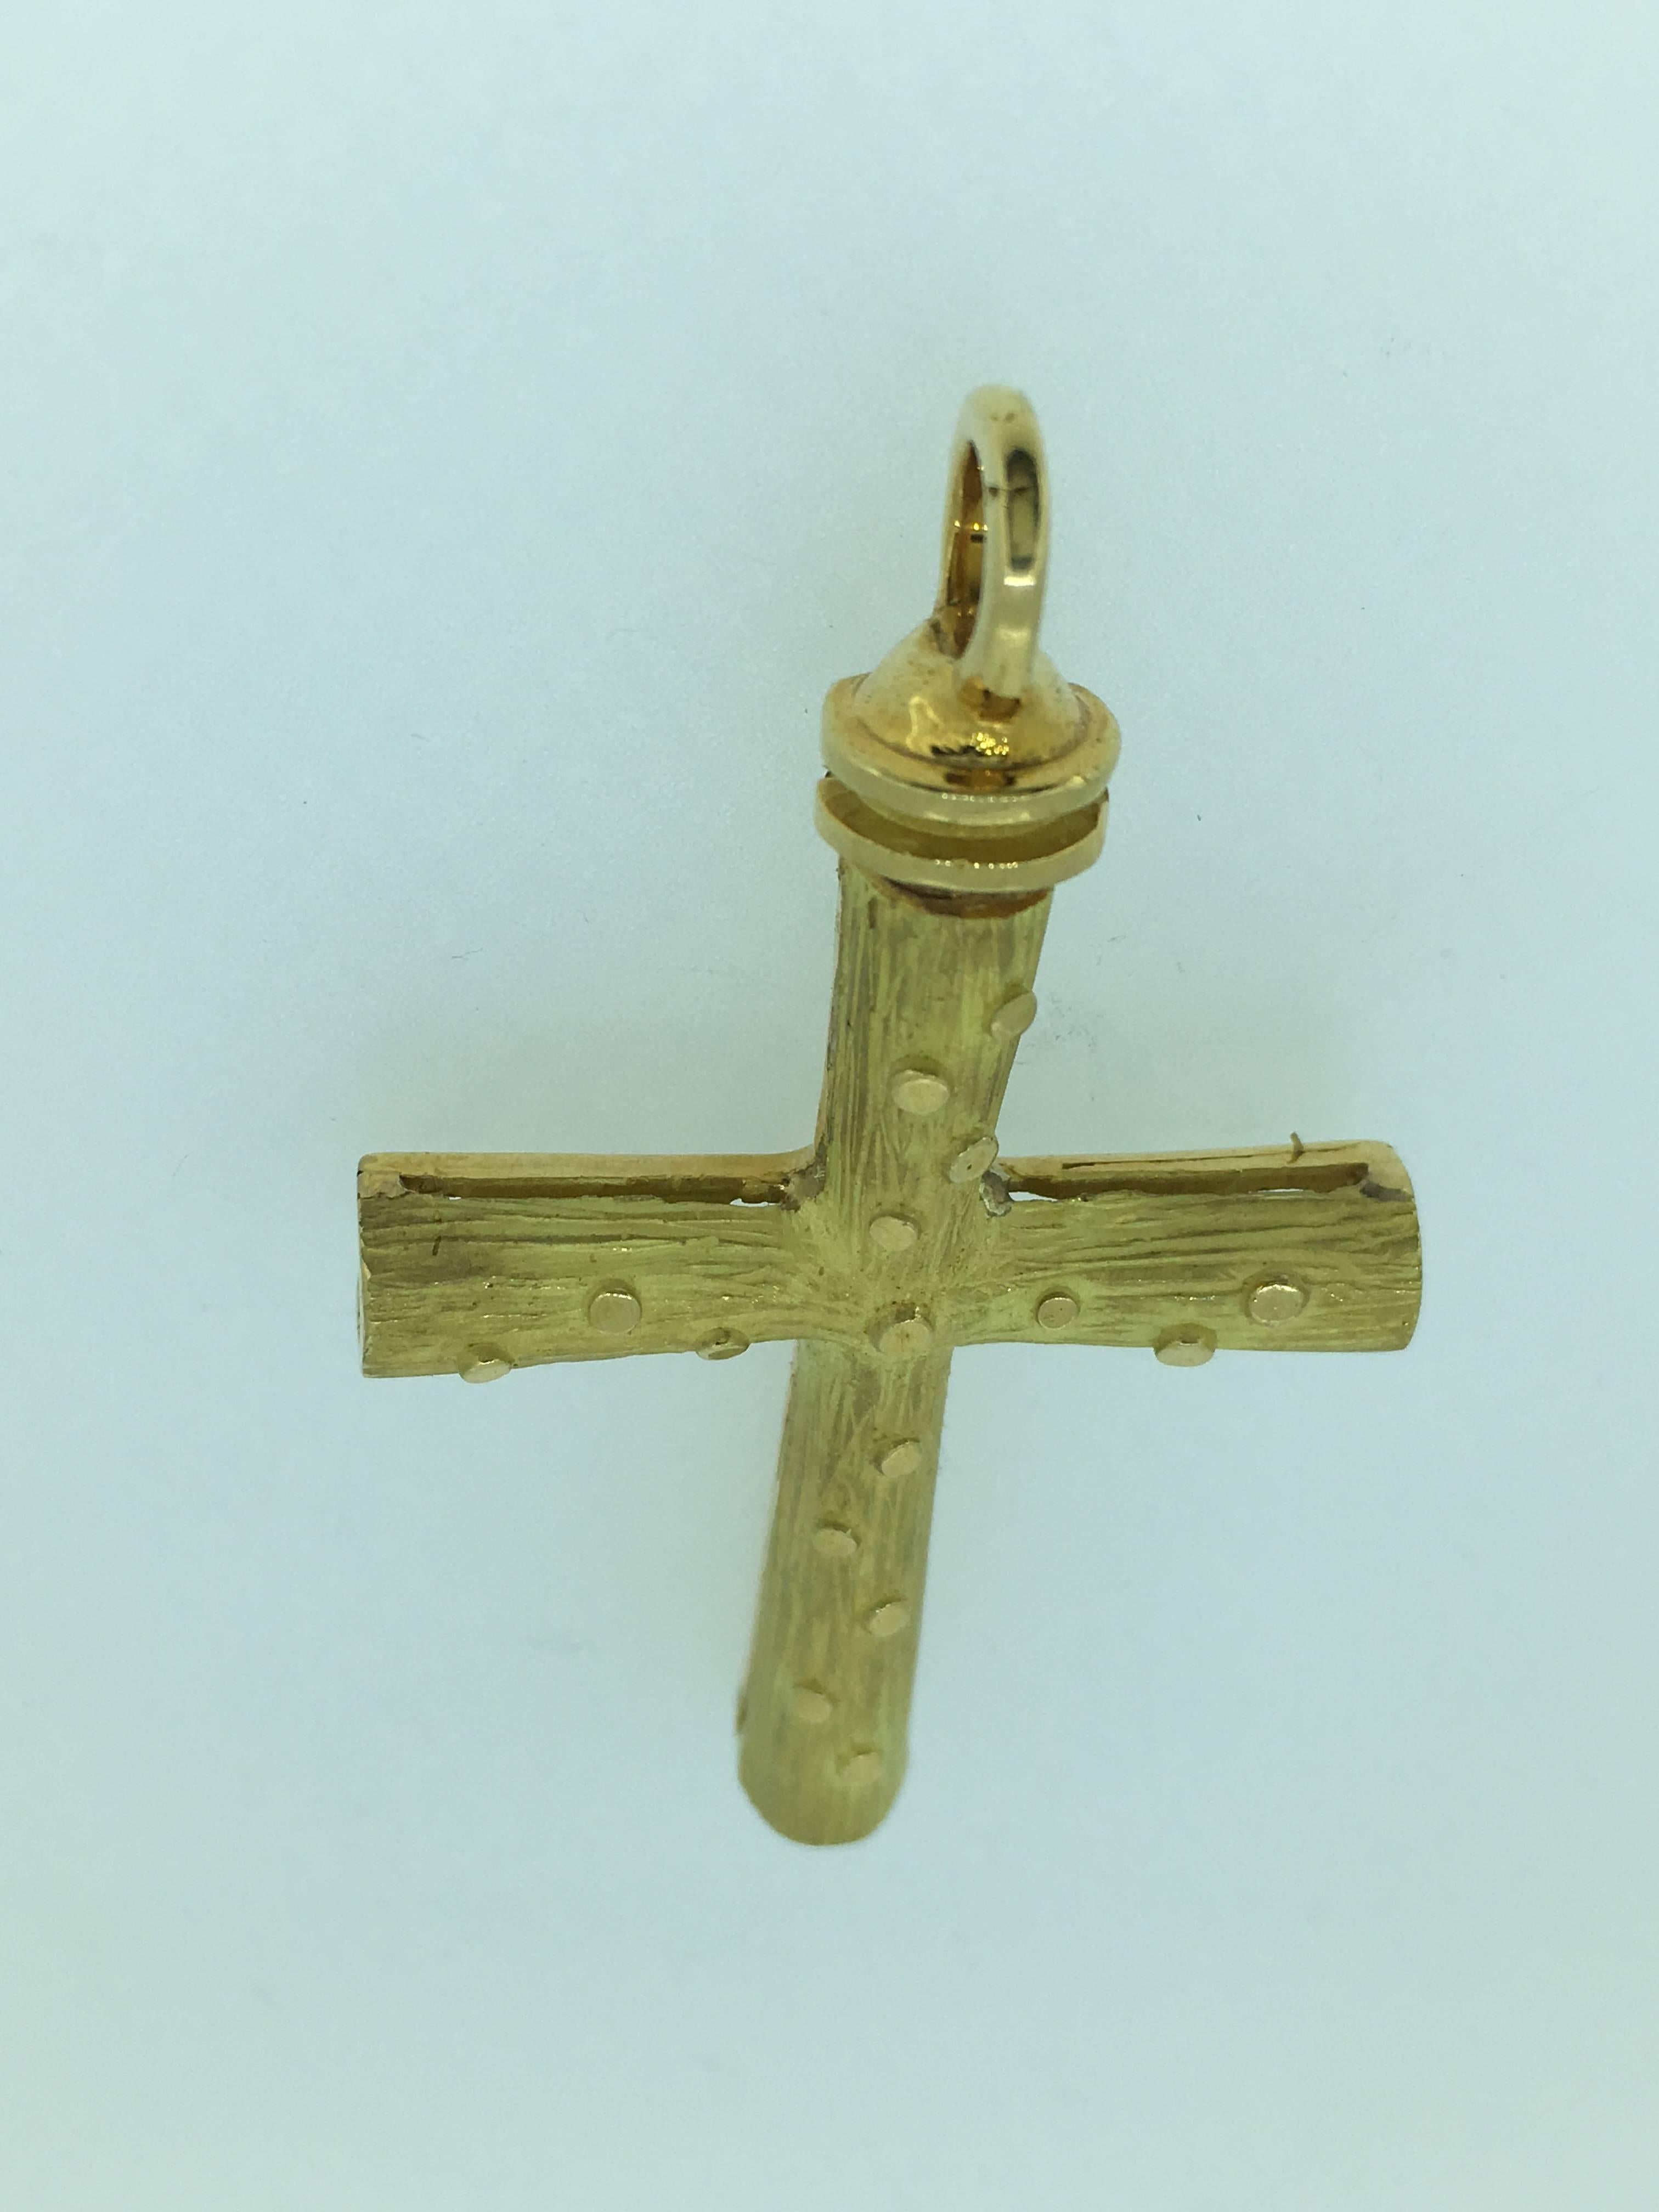 This is a one of a kind 18 carats gold cross signed SVG
The cross weights 16.5 gr gold .